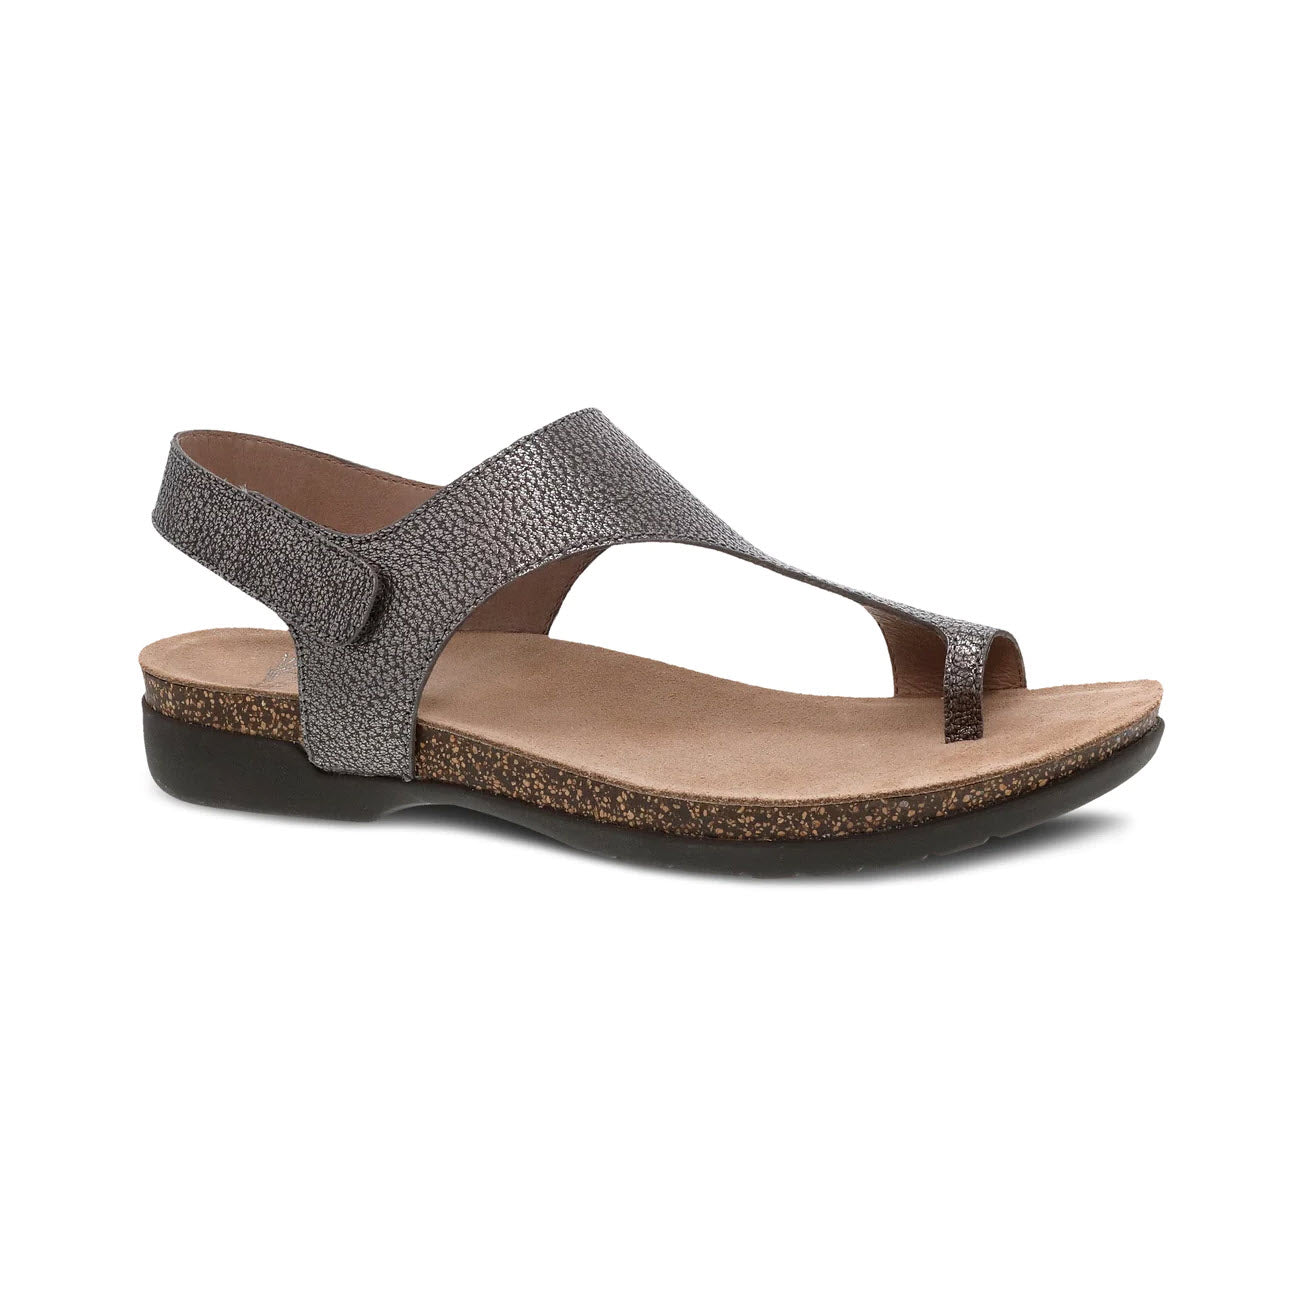 A single Dansko Reece Pewter sandal with a textured strap and a cork midsole, isolated on a white background.